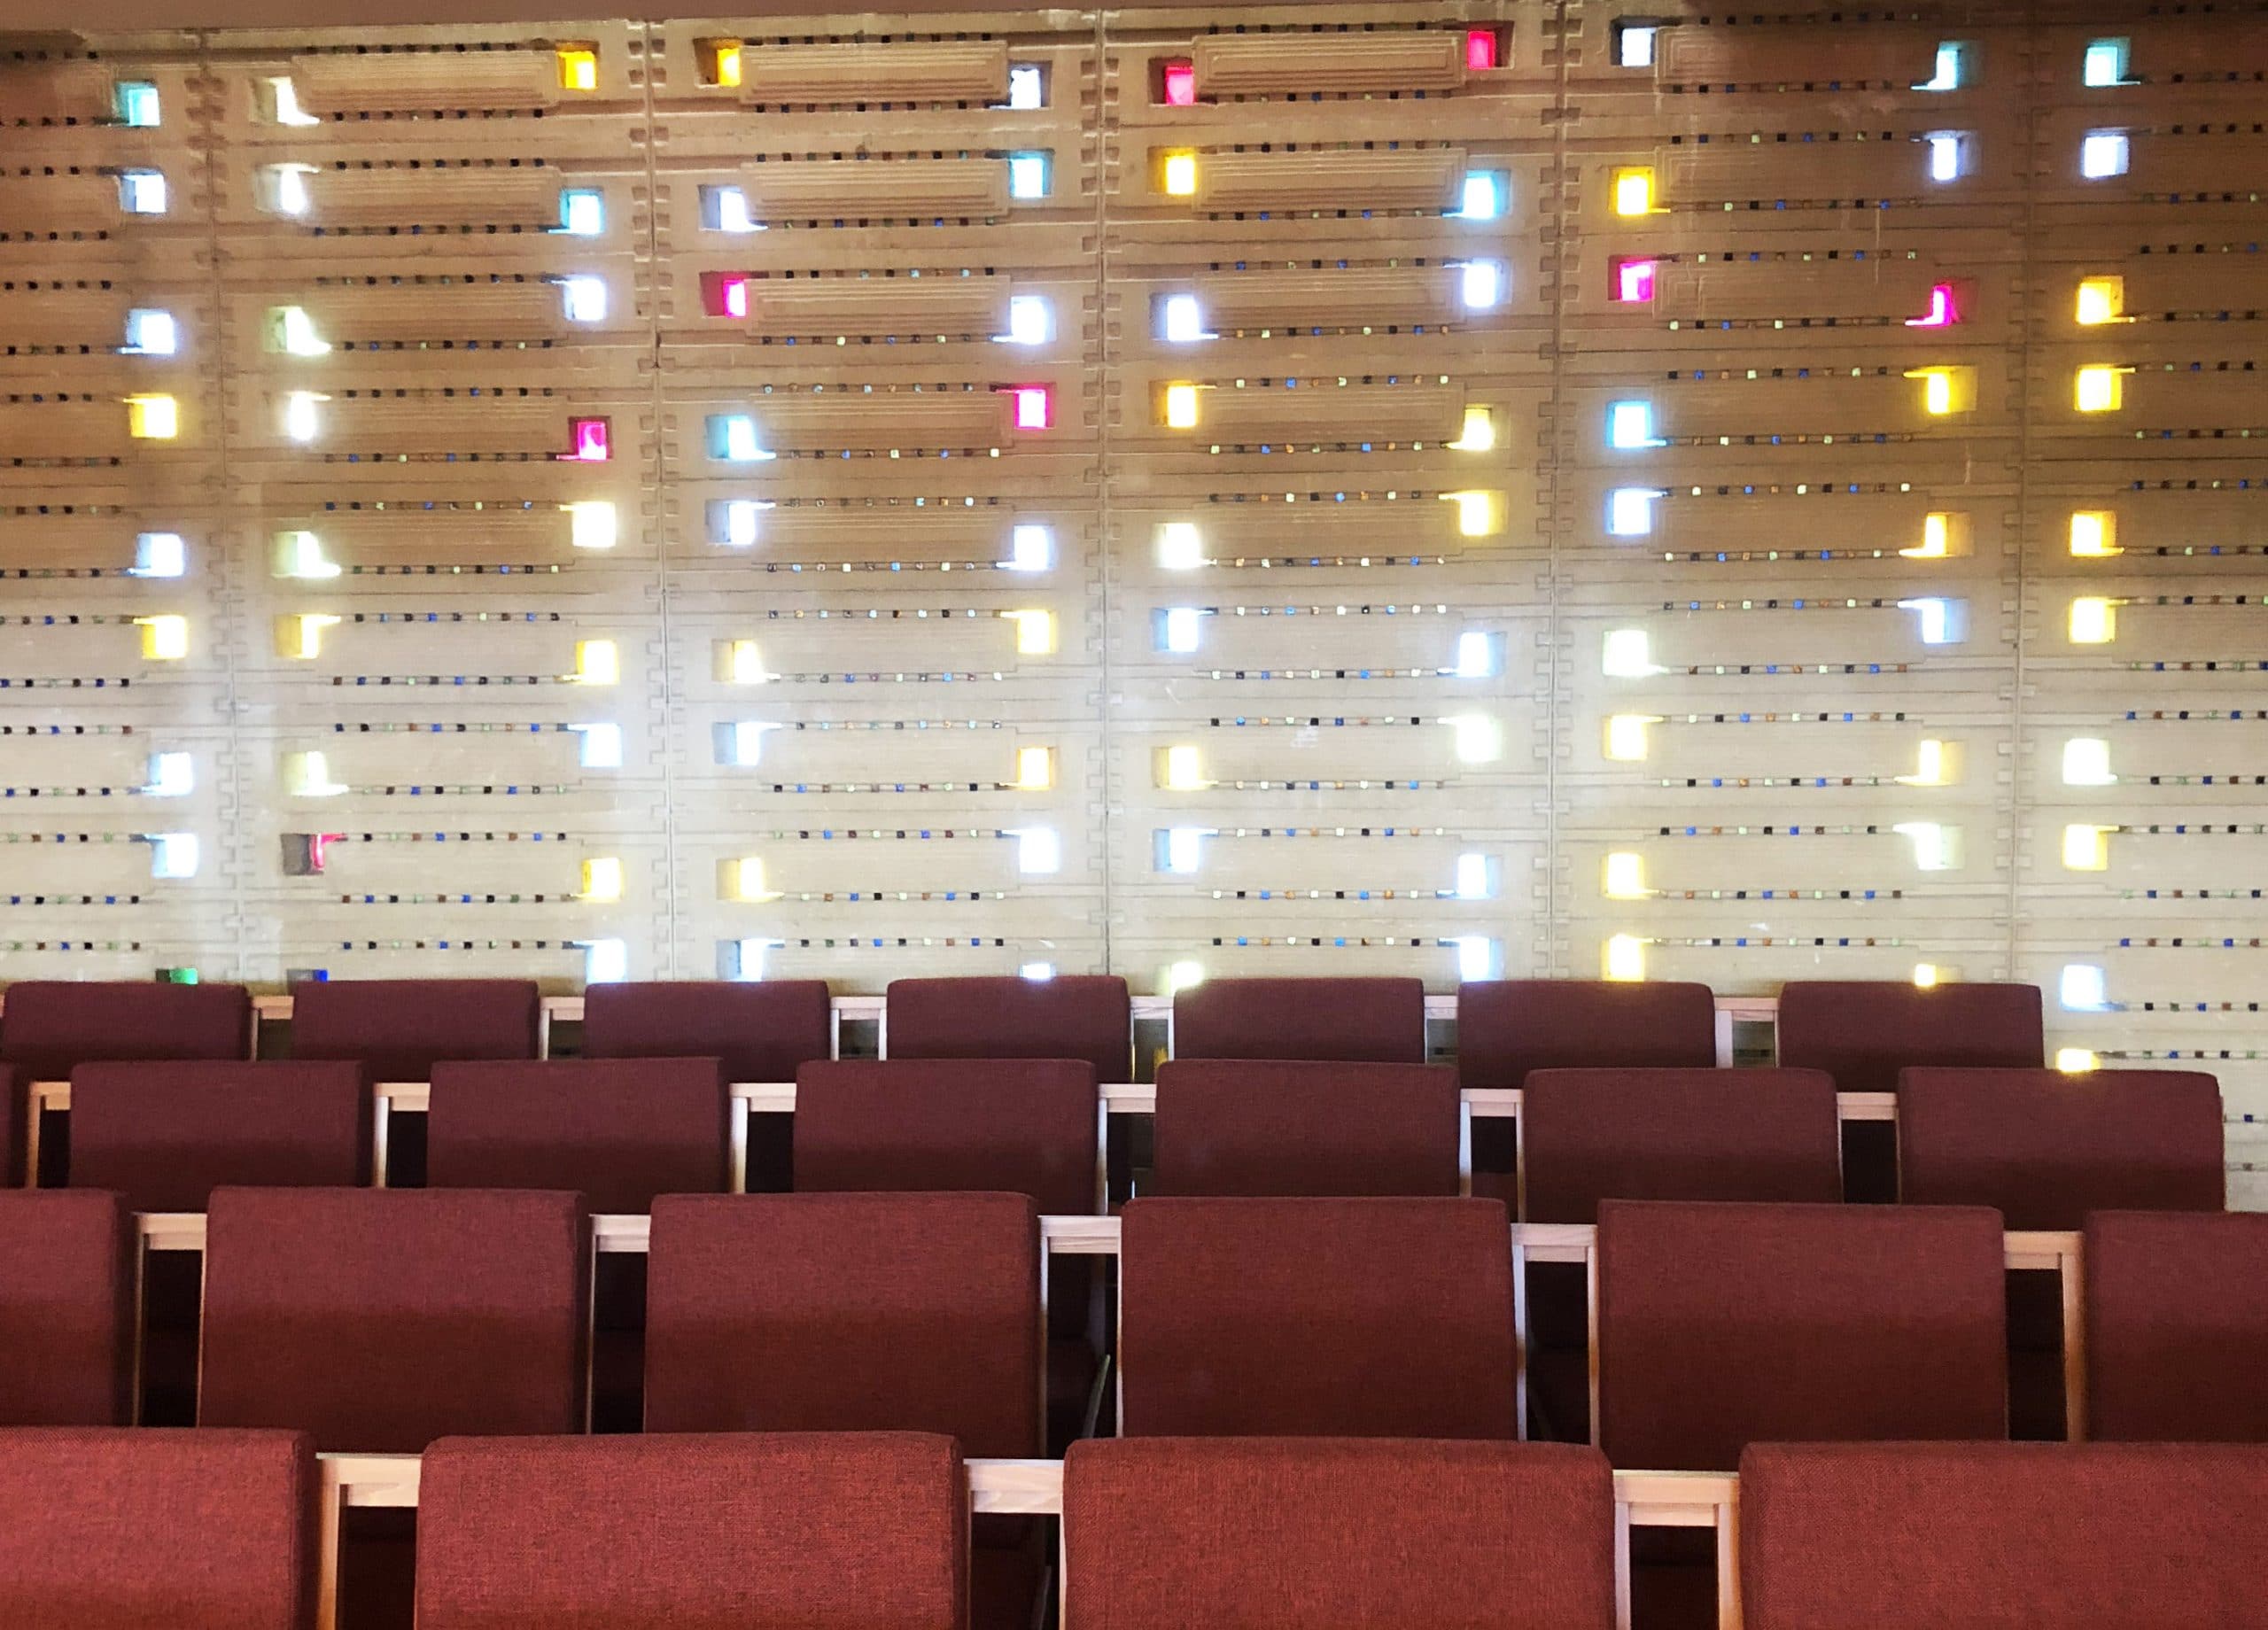 Light streams into the Annie Pfeiffer Chapel through unique block and stained glass work